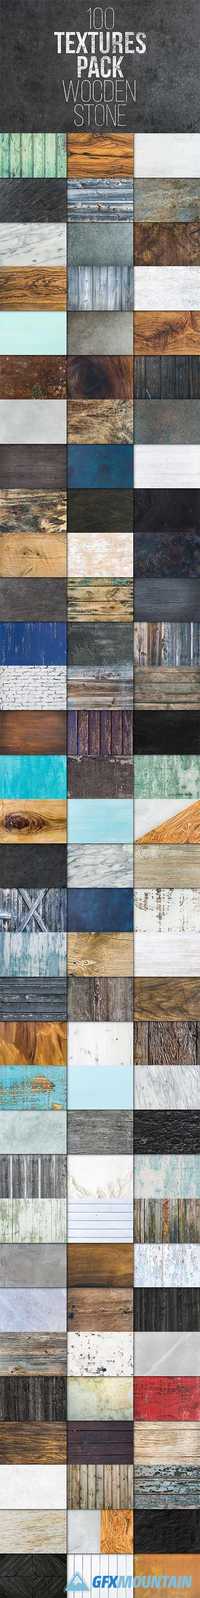 100 TEXTURES PACK. WOODEN & STONE - 1723951